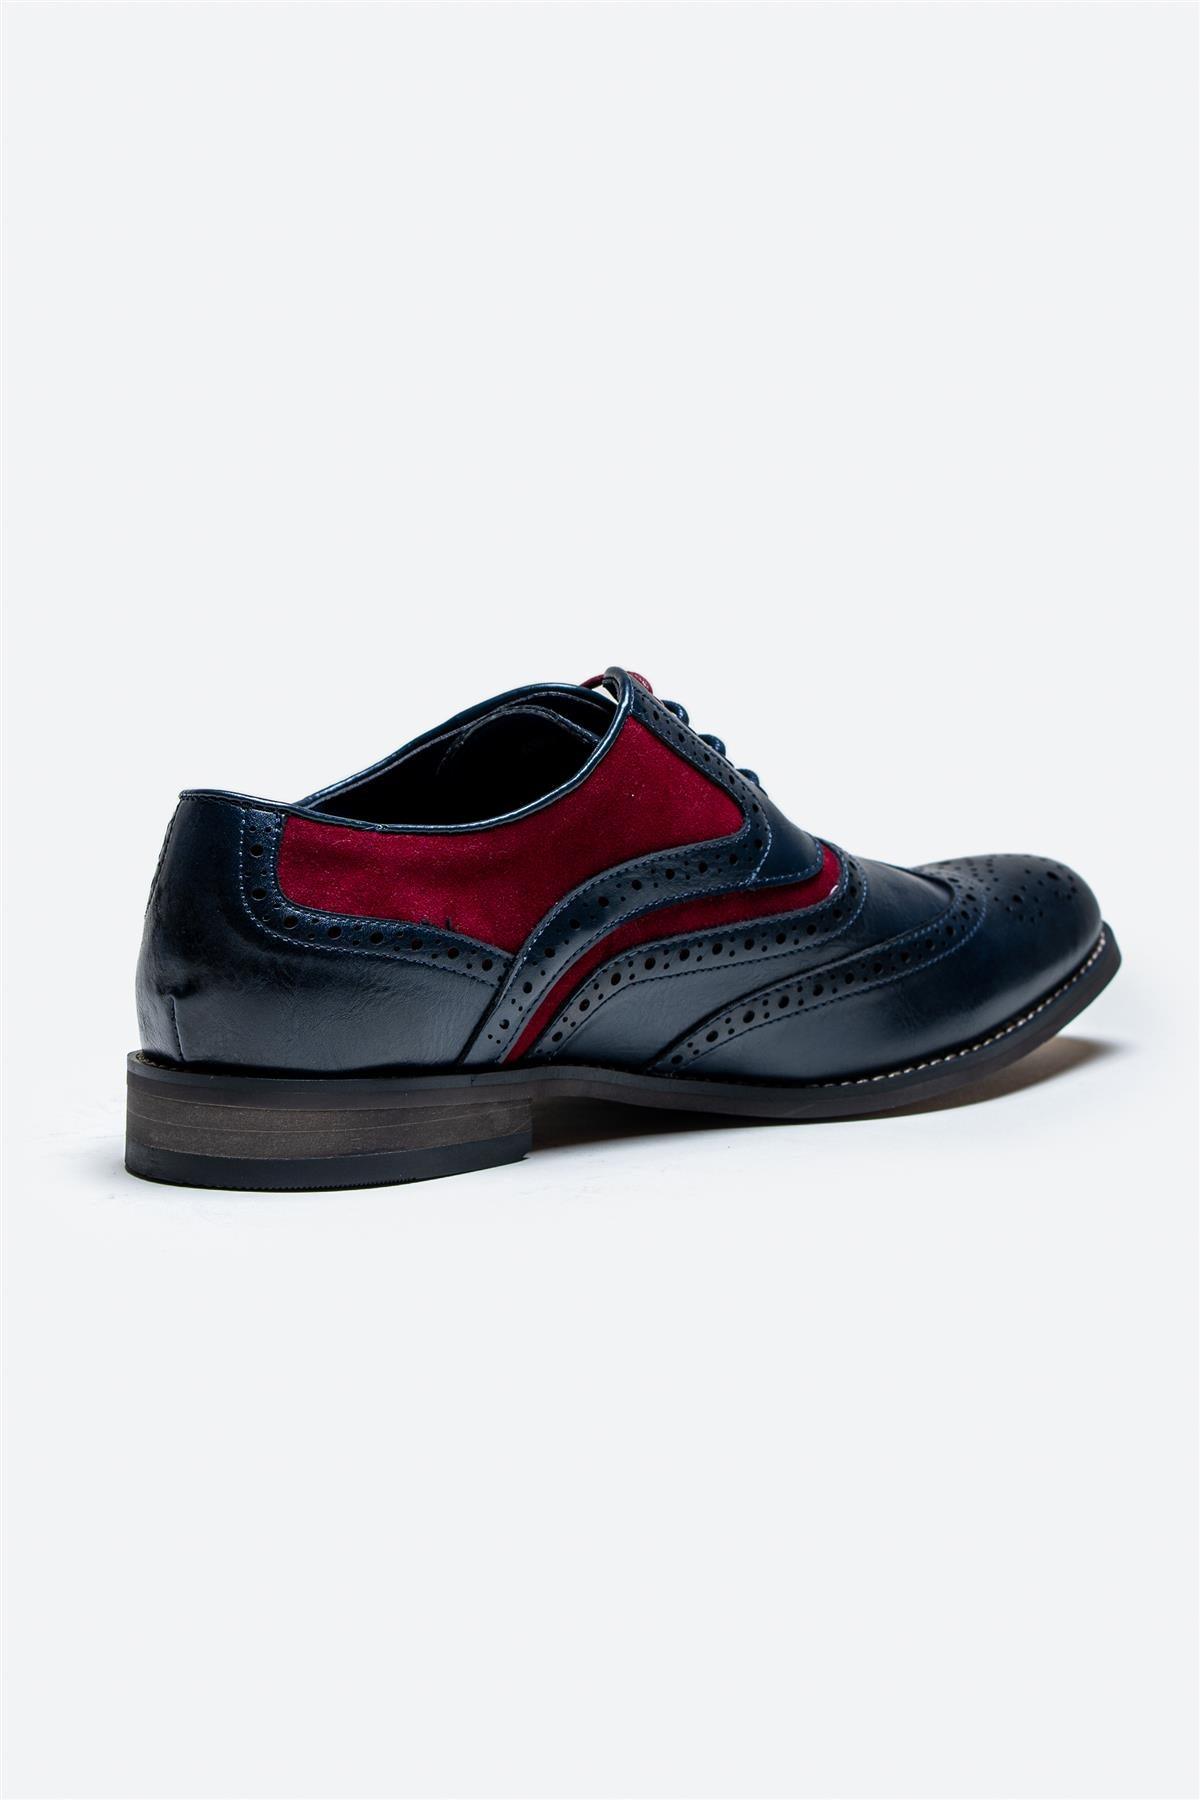 Russel navy/red shoe back